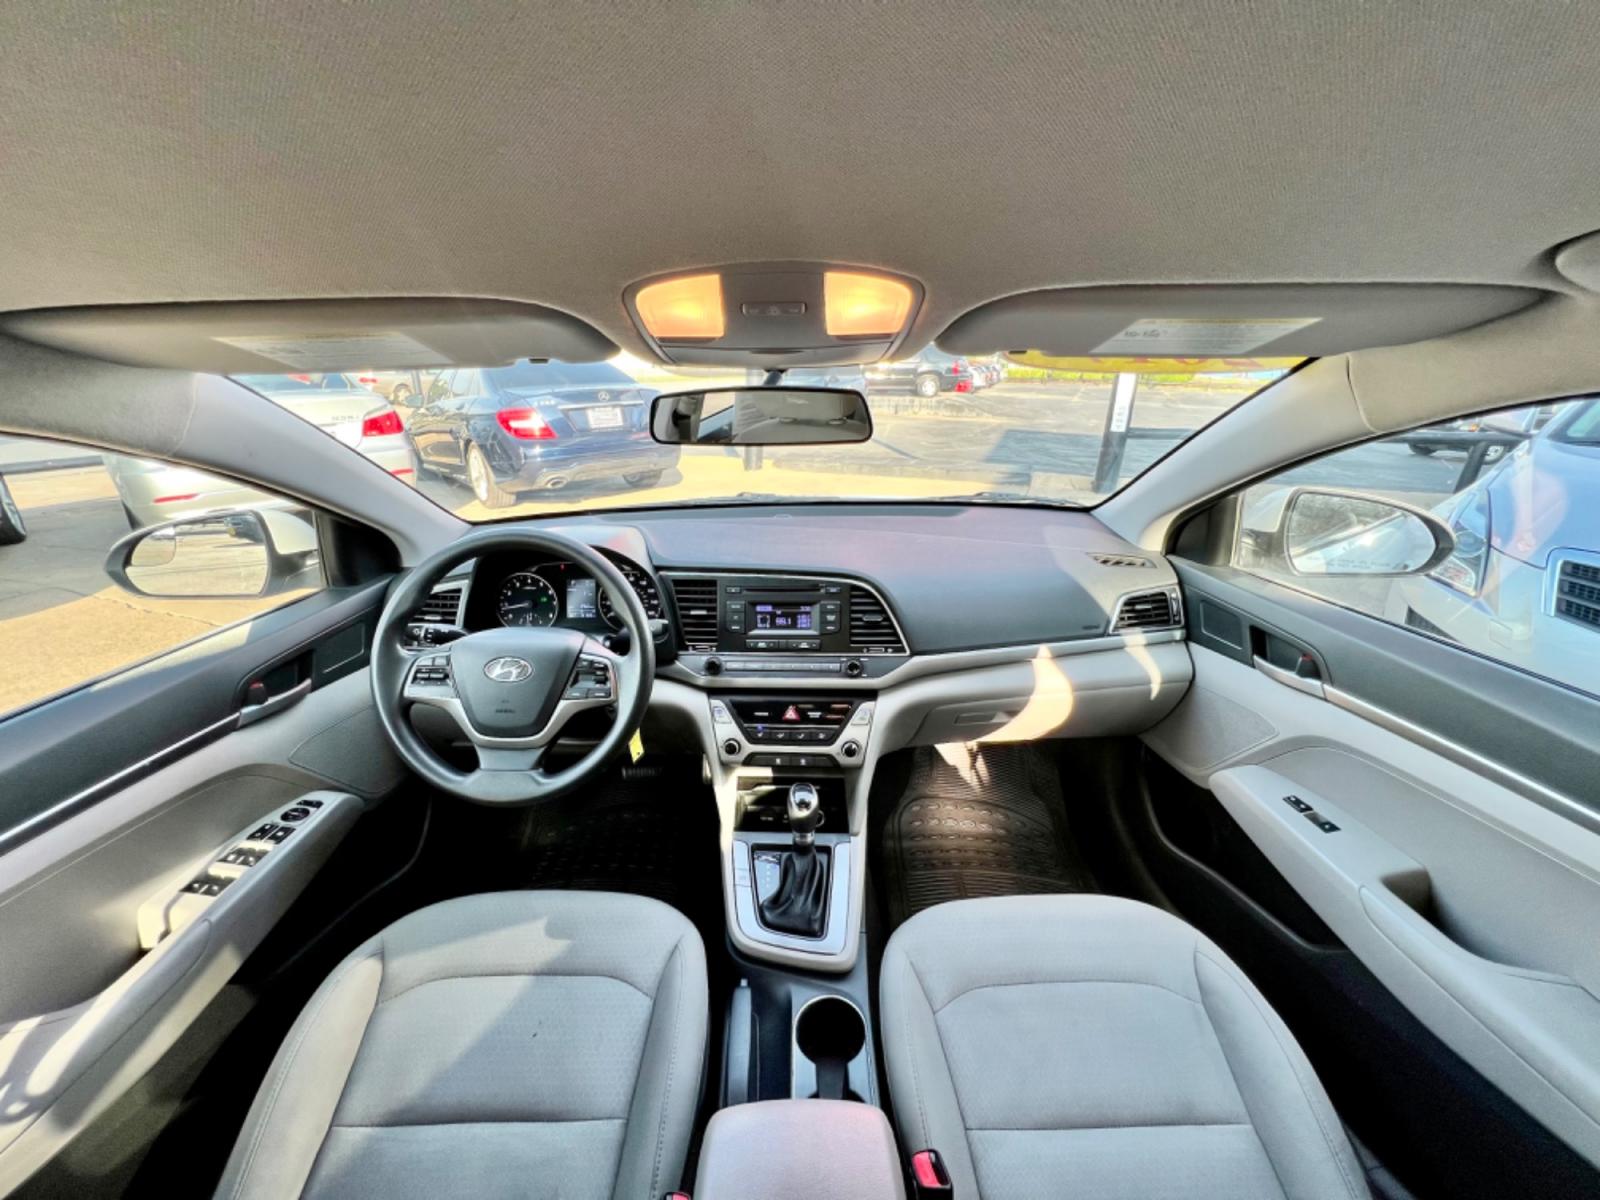 2017 WHITE HYUNDAI ELANTRA (5NPD74LF7HH) , located at 5900 E. Lancaster Ave., Fort Worth, TX, 76112, (817) 457-5456, 0.000000, 0.000000 - This is a 2017 HYUNDAI ELANTRA 4 DOOR SEDAN that is in excellent condition. There are no dents or scratches. The interior is clean with no rips or tears or stains. All power windows, door locks and seats. Ice cold AC for those hot Texas summer days. It is equipped with a CD player, AM/FM radio, AUX - Photo #16